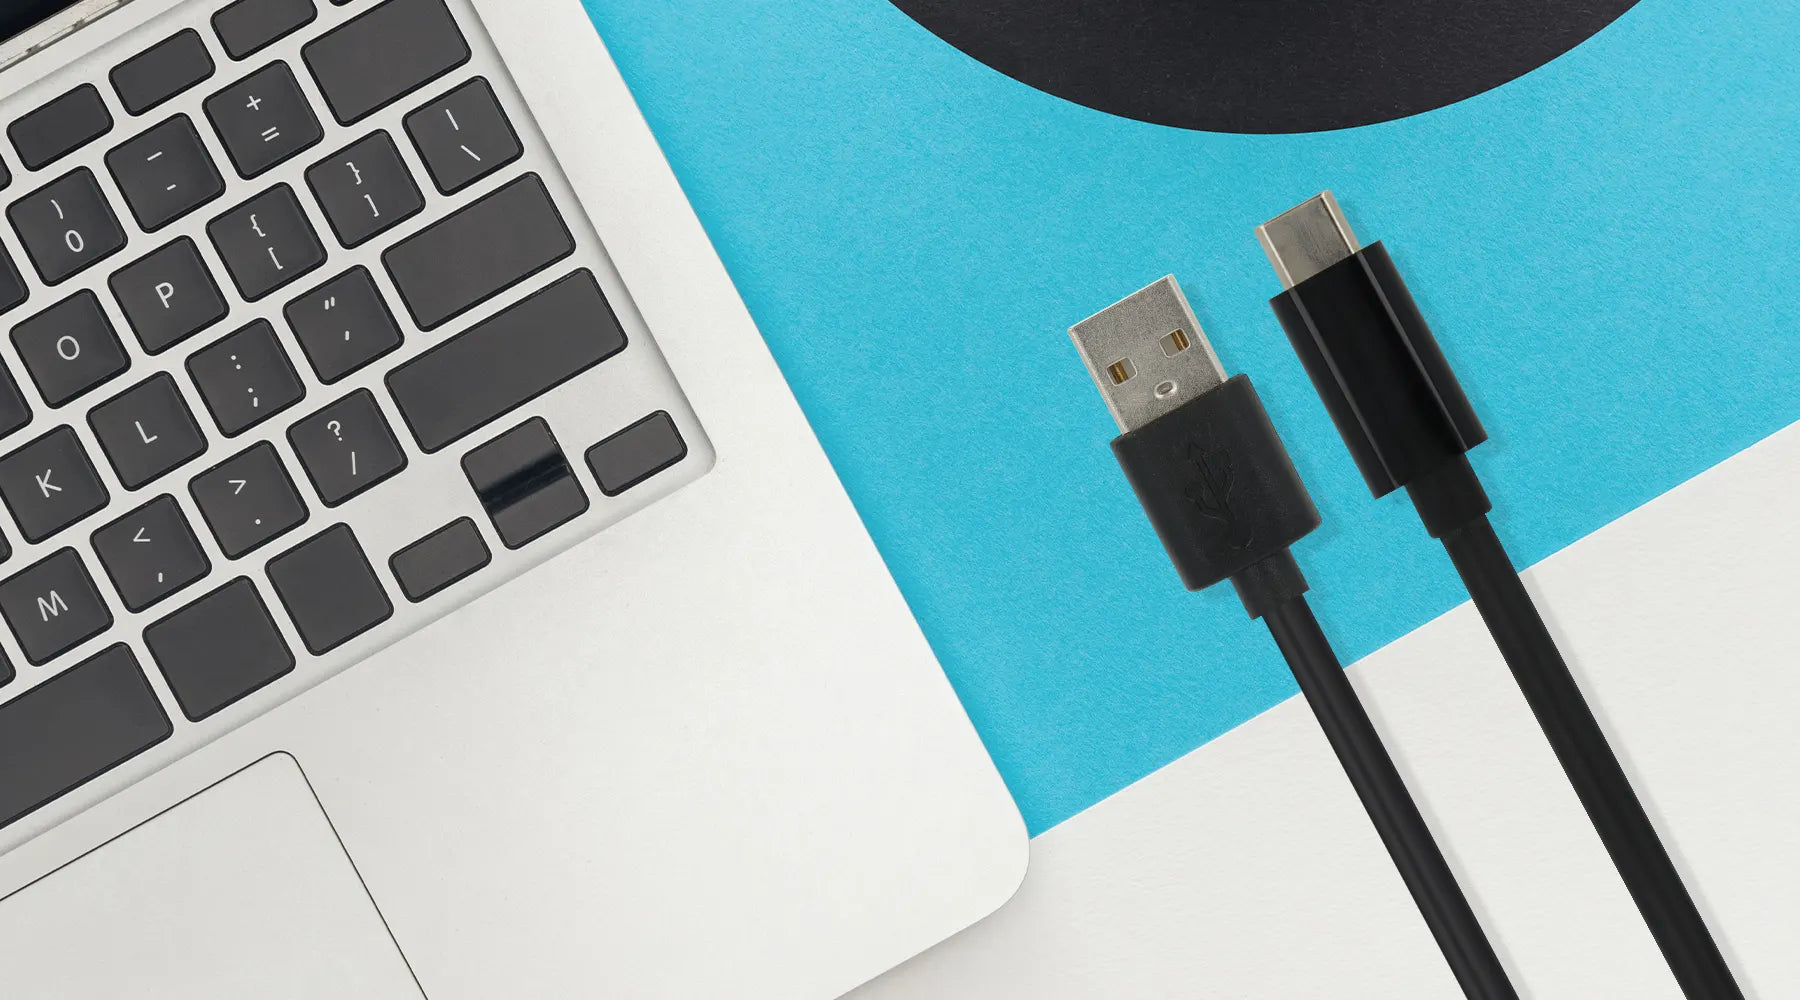 Does USB-C Charge Faster Than USB? Here's What To Know